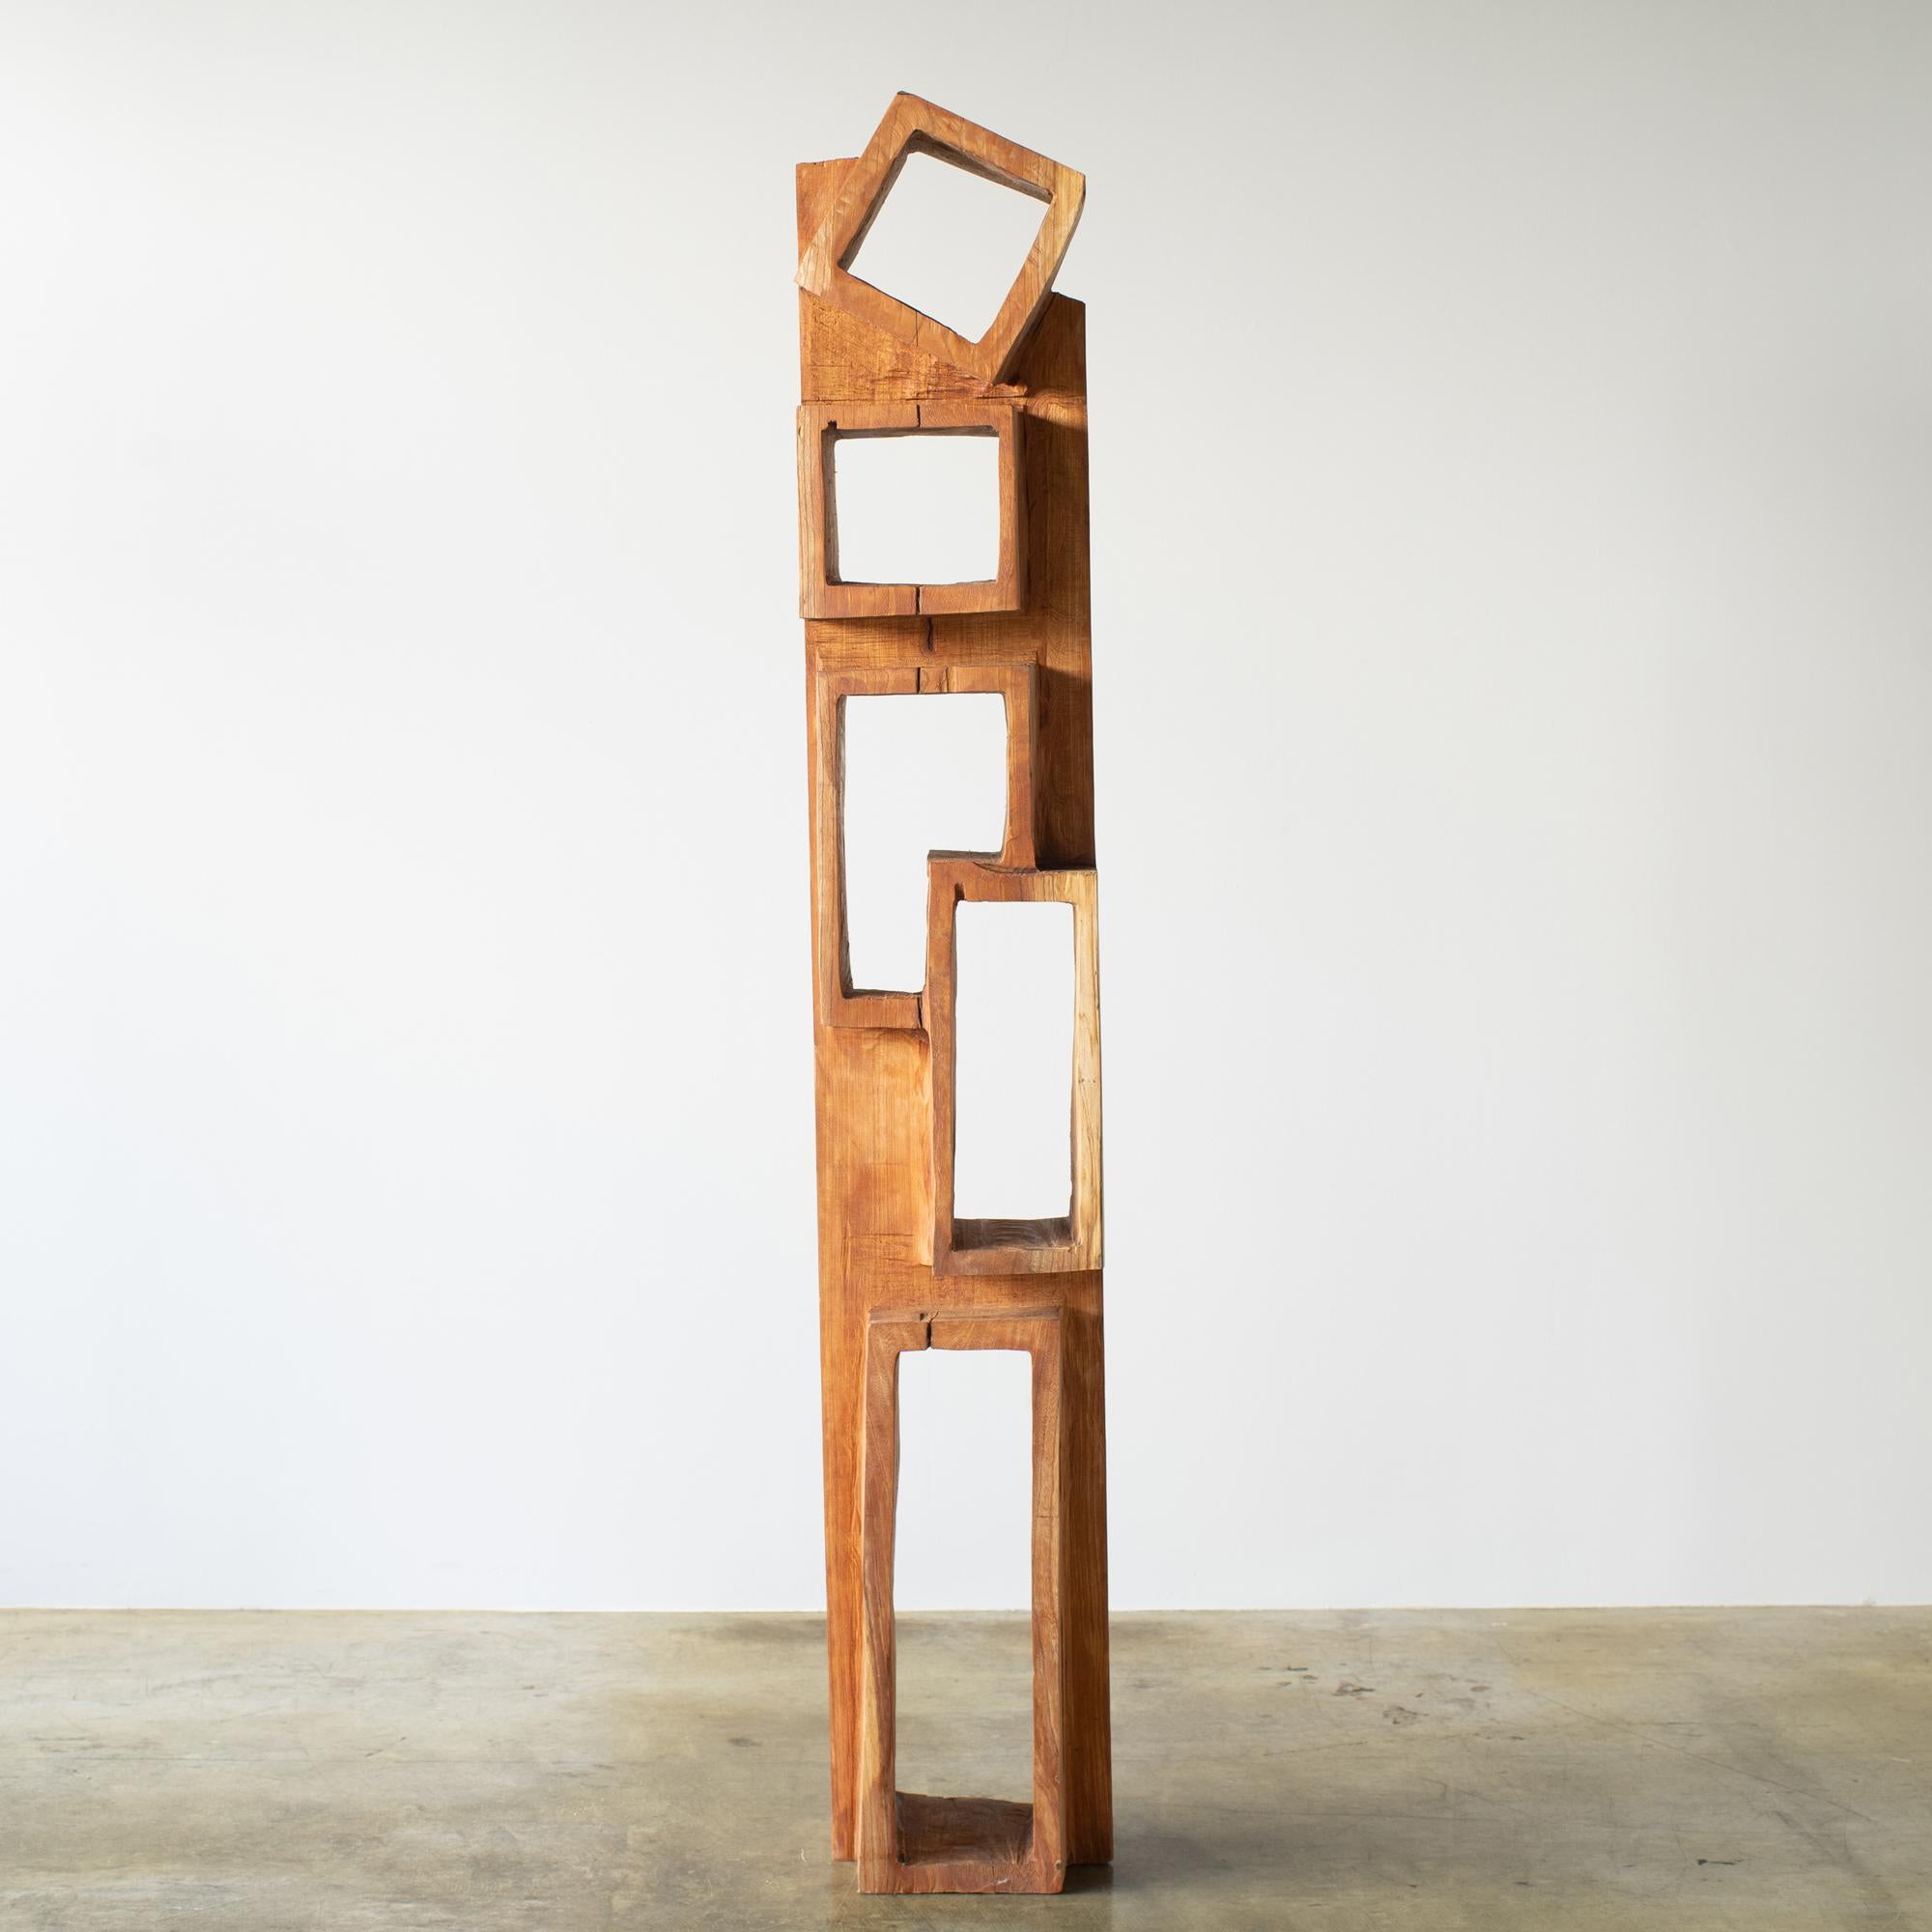 Masouleh Tower
Sculpture. Also it can be used as small bookcase. 

Material: Zelkova
This work is carved from log with some kinds of chainsaws.
Most of wood used for his works are unable to use anything, these woods are unsuitable material for